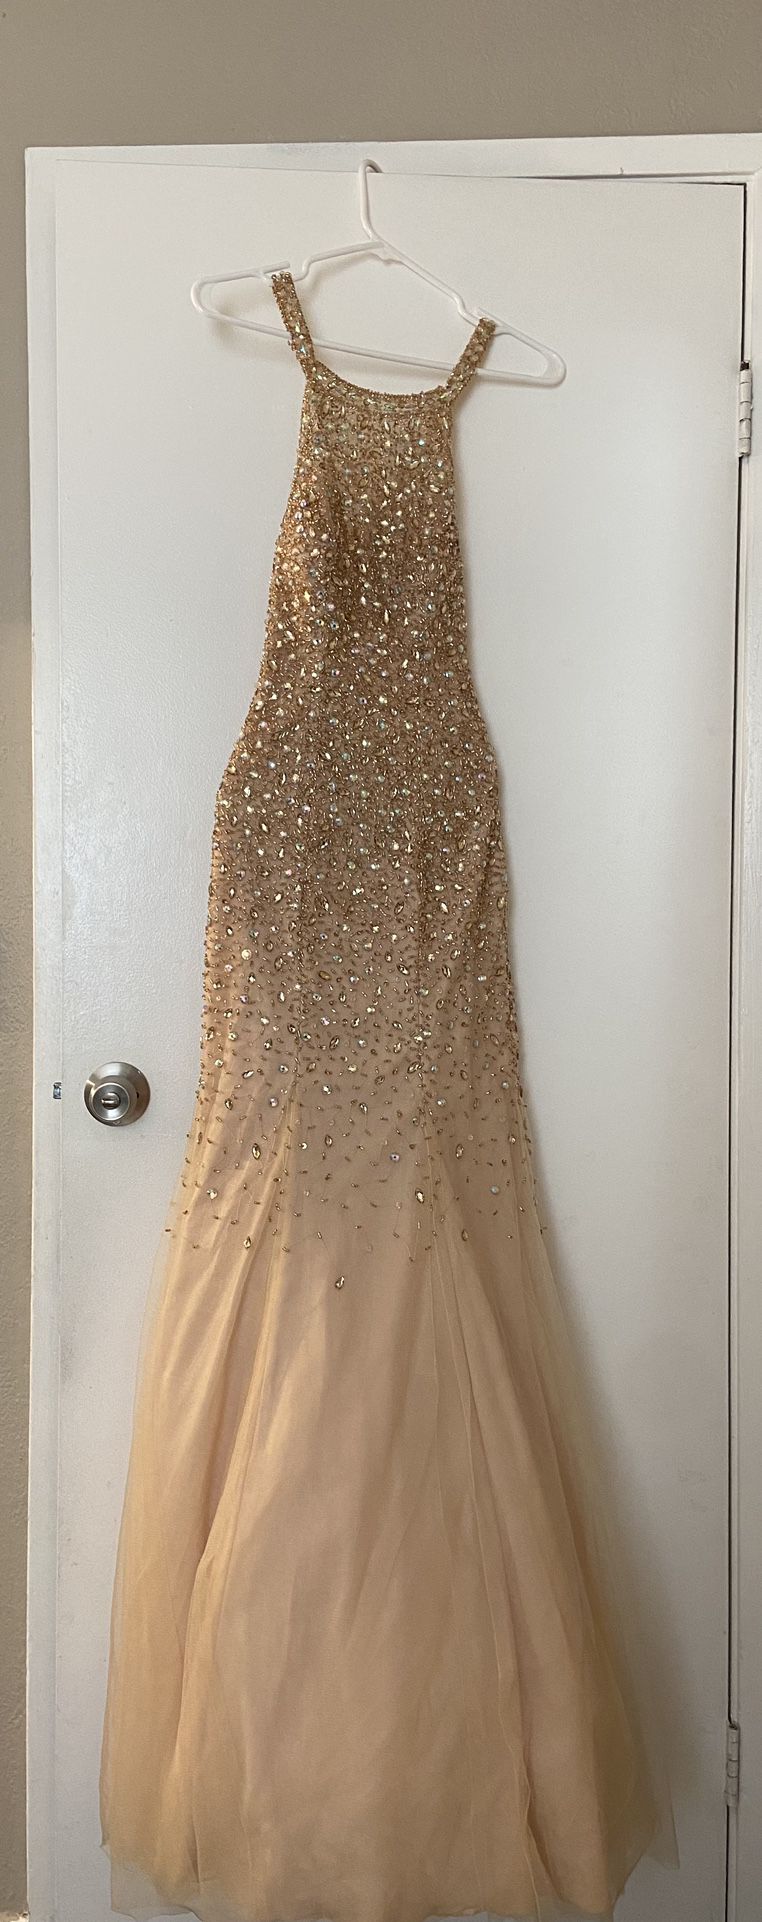 Prom Dress: Gold Color With Gems: XS